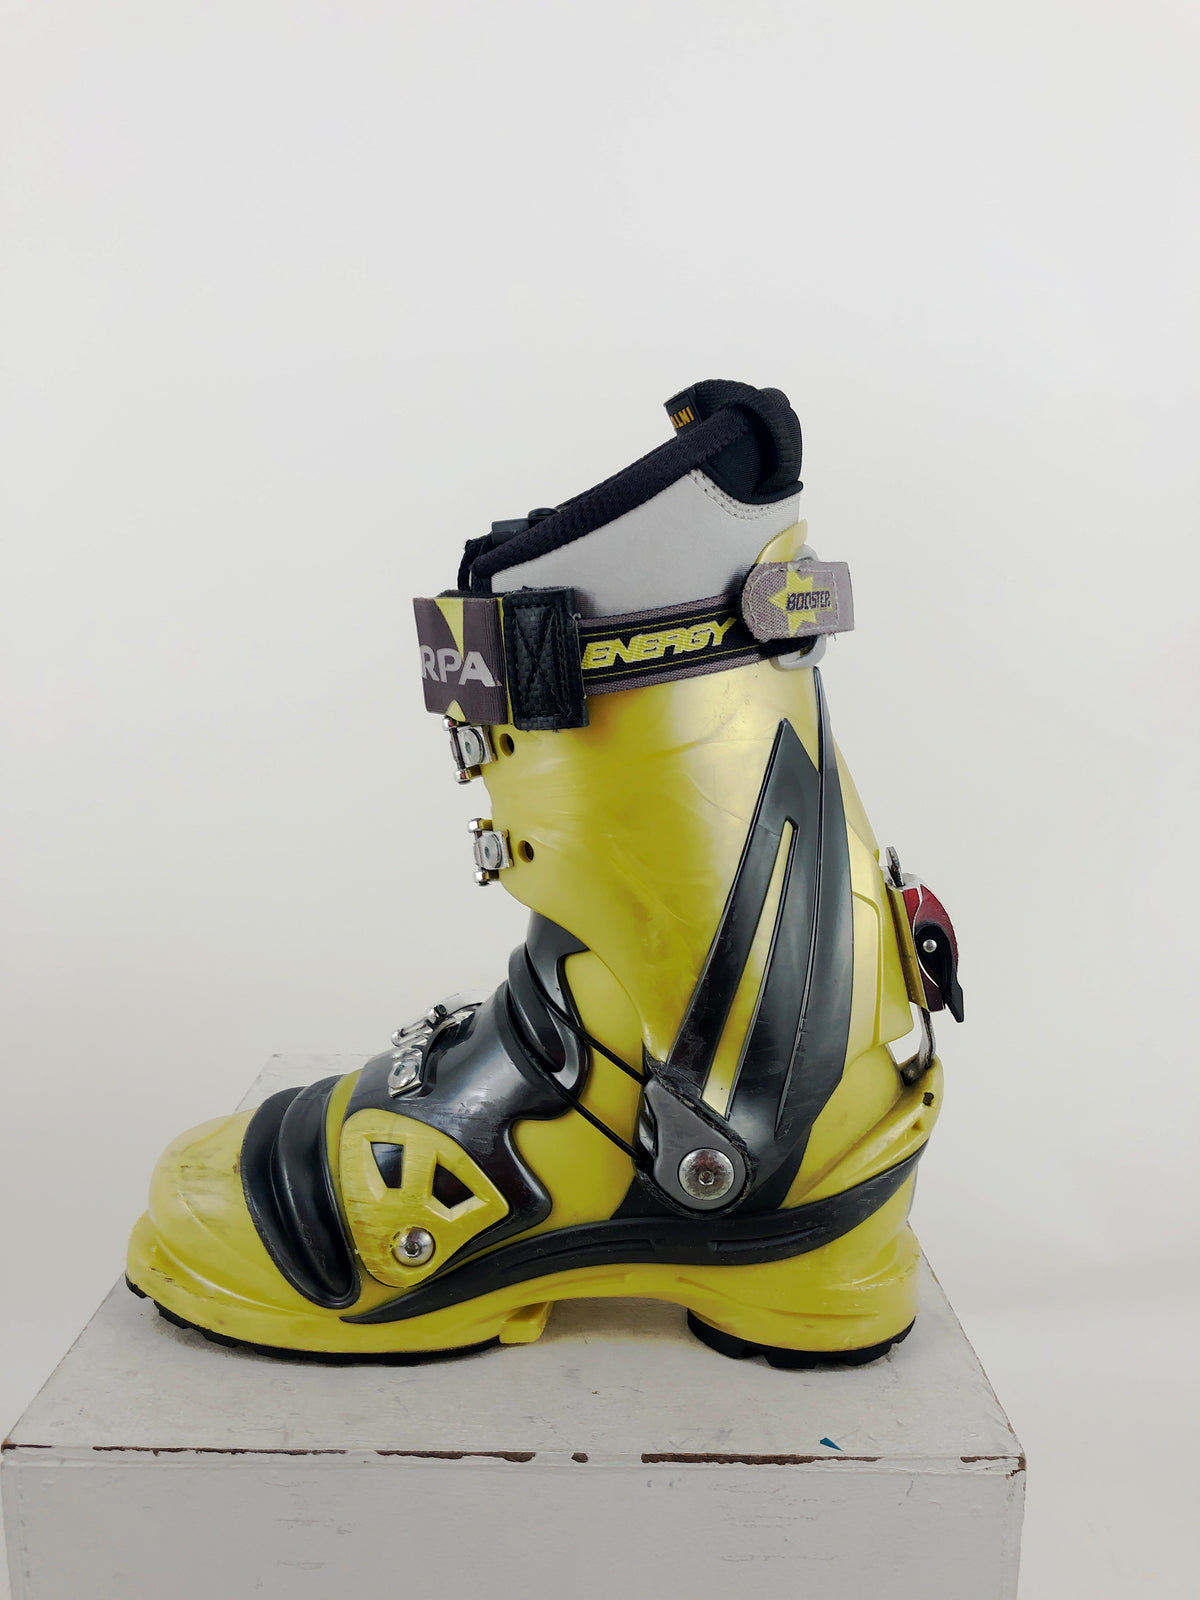 25.0 Scarpa TX Comp w/ Intuition Tongue (Used)